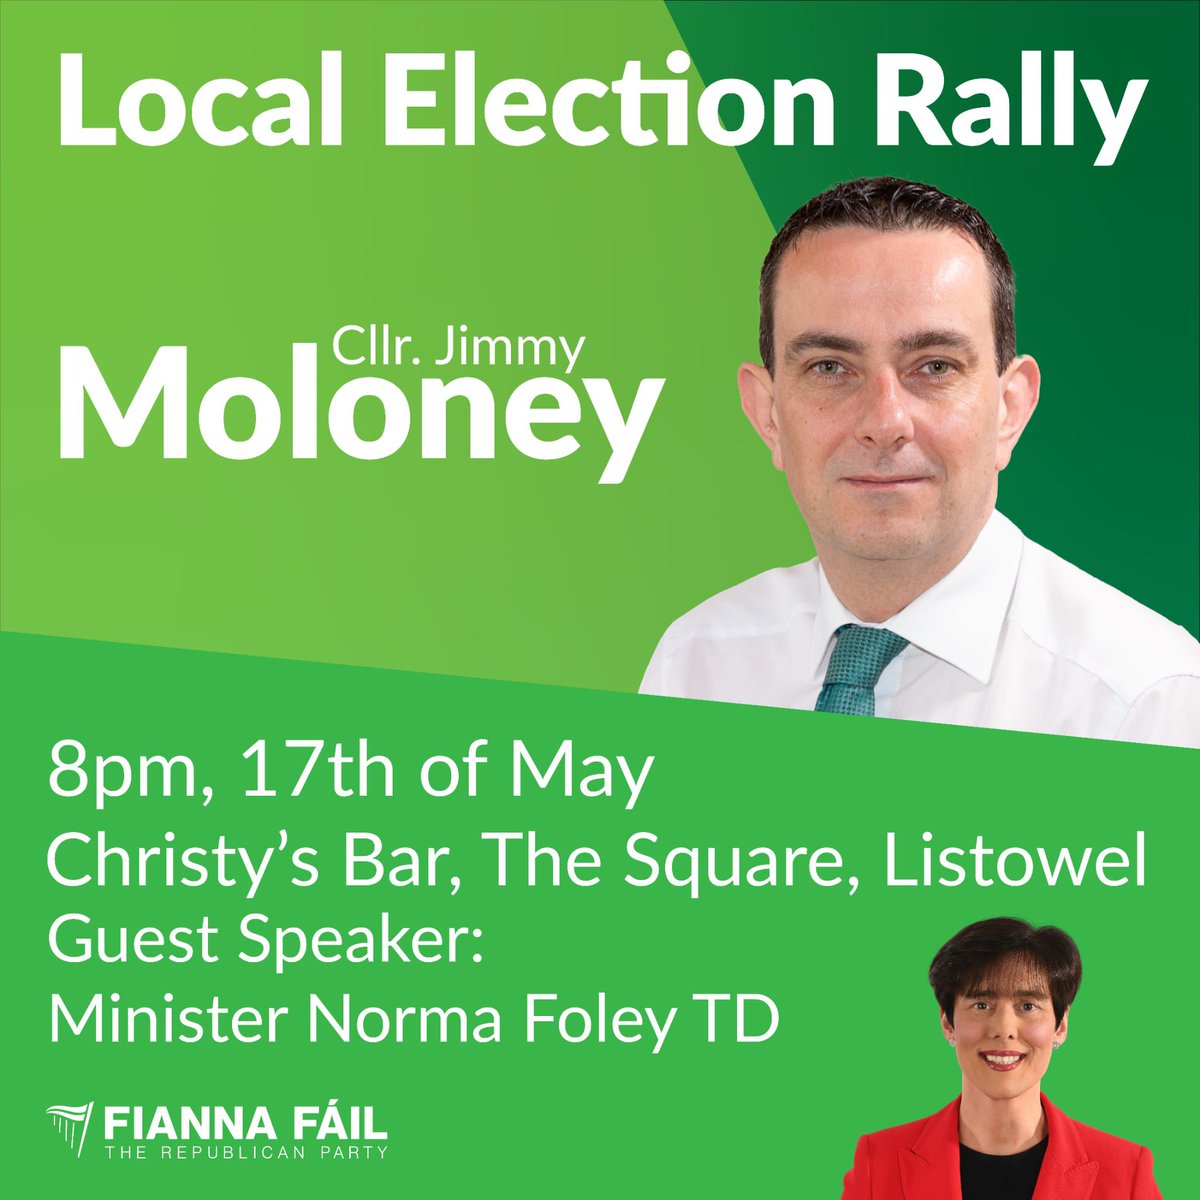 Local Election Rally this Friday in Christys. Guest speaker Minister for Education Norma Foley. See you there !